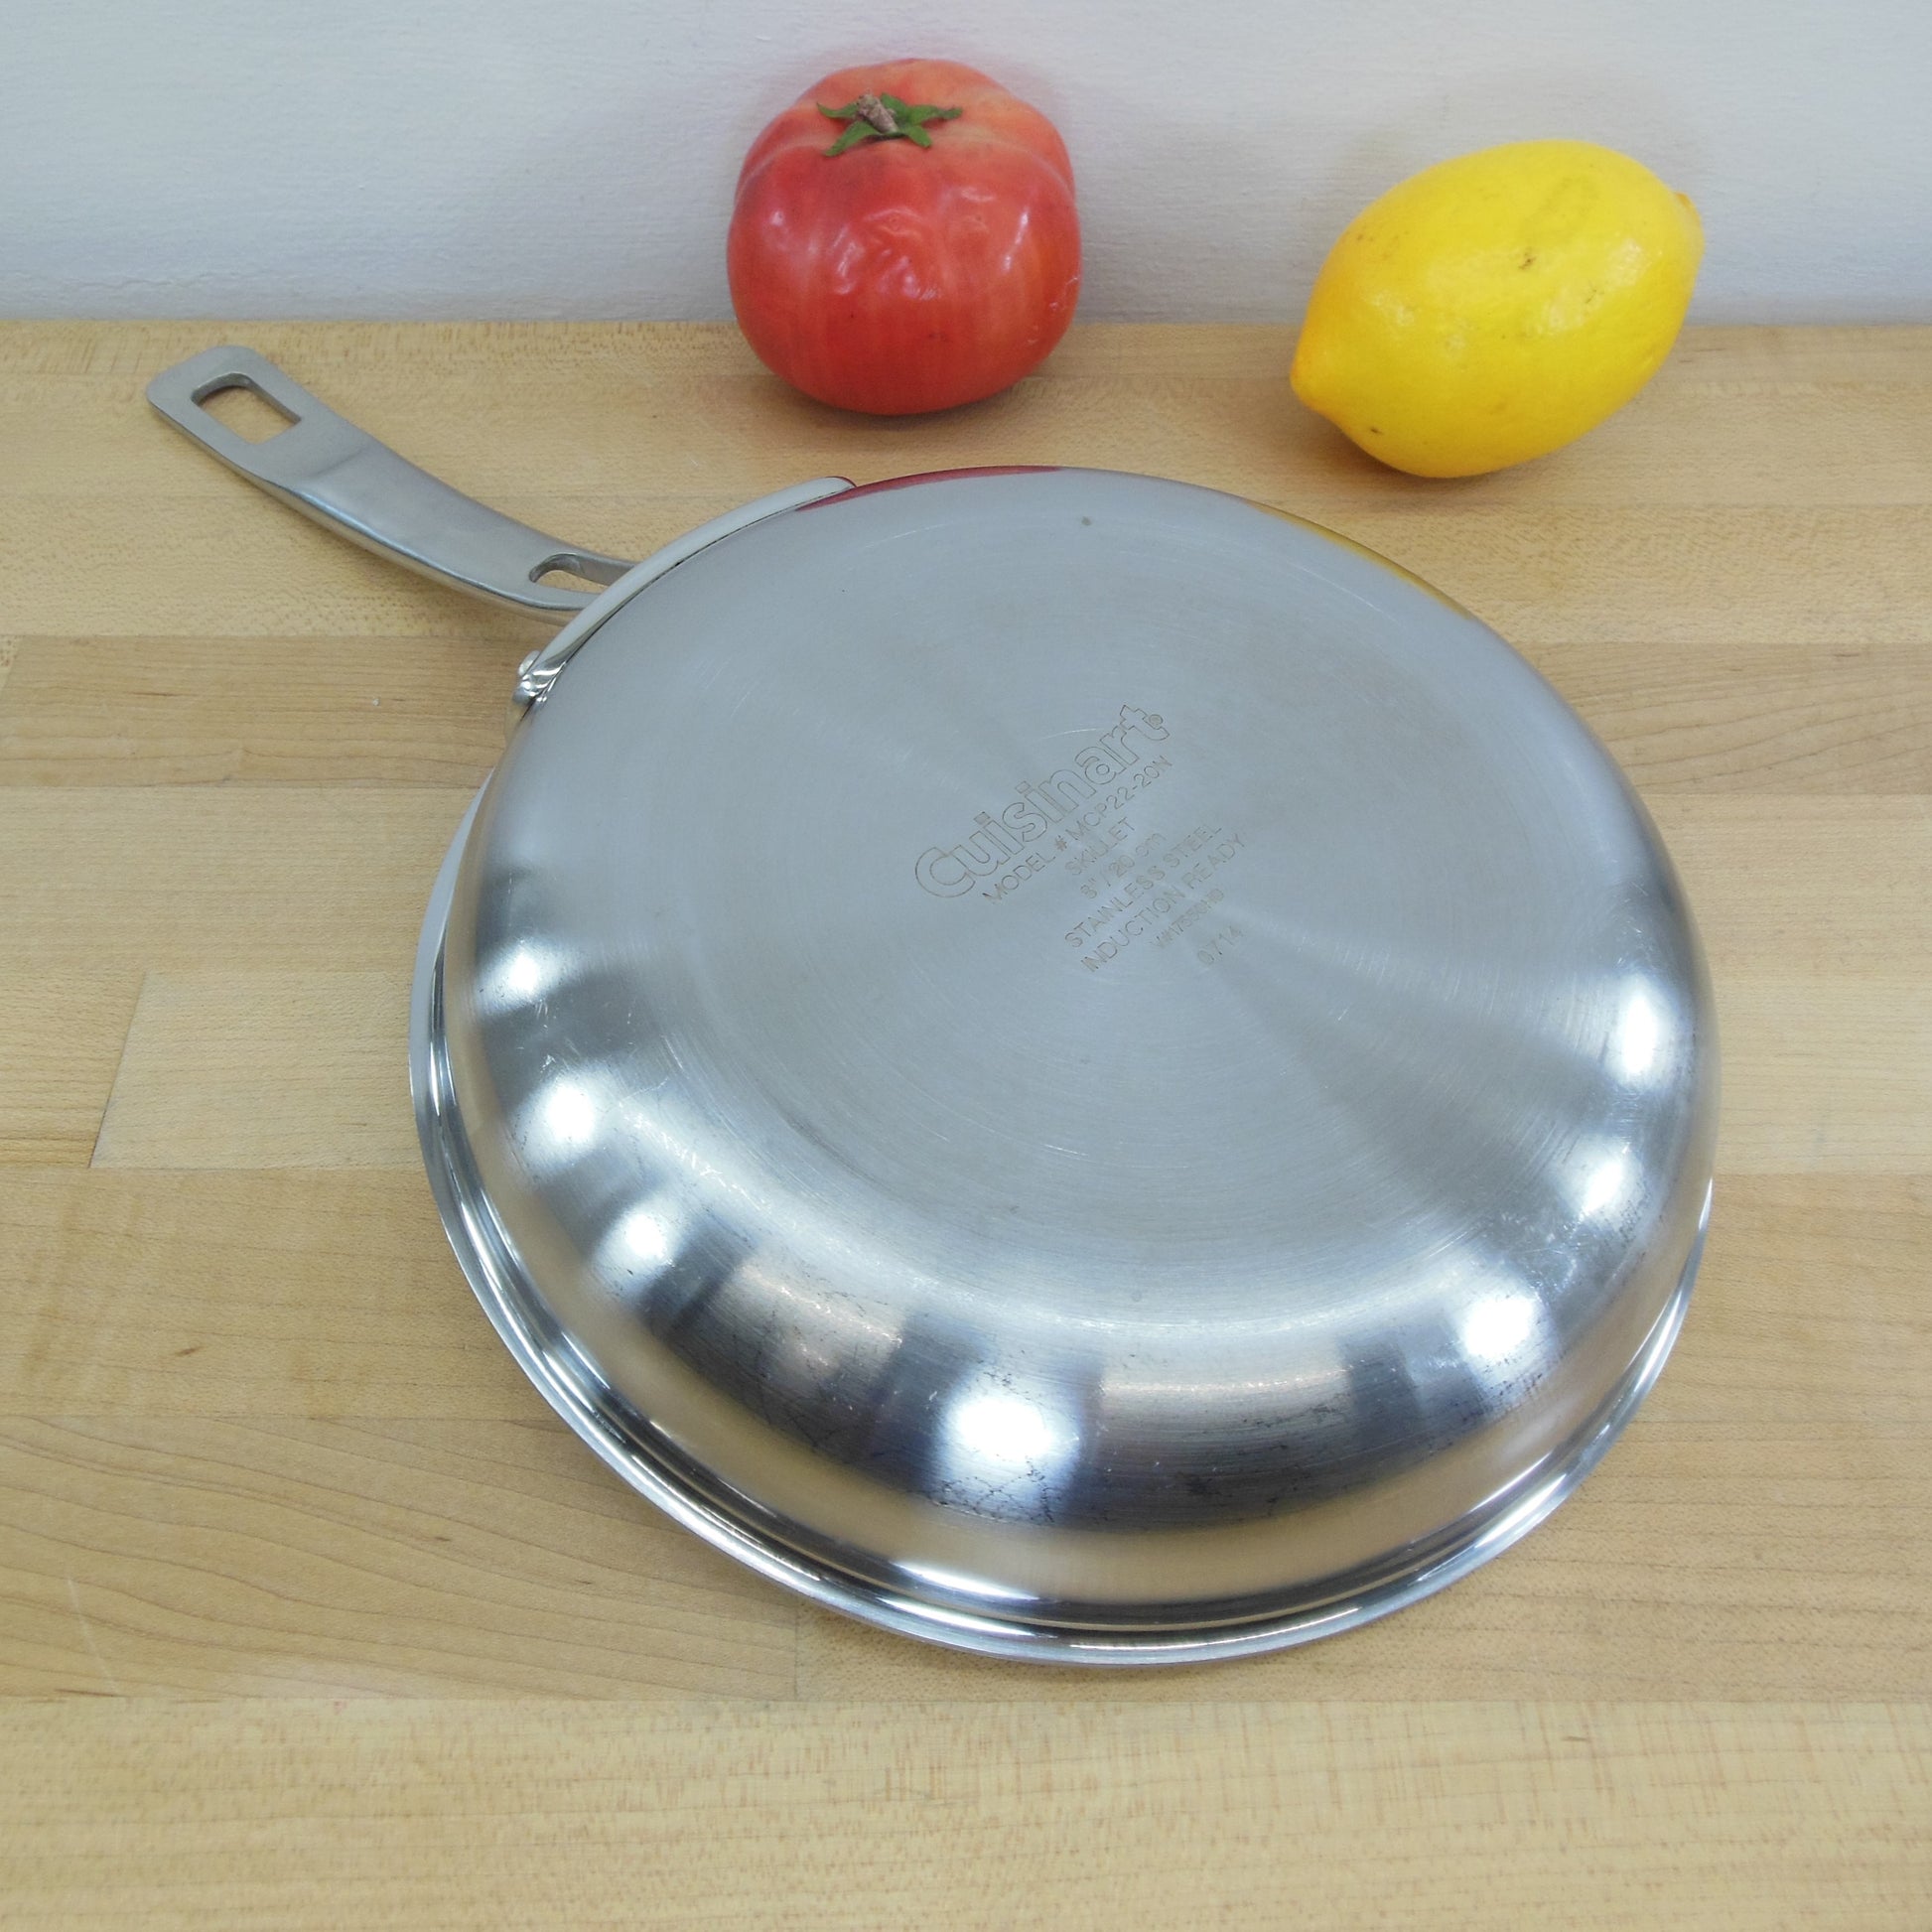 MultiClad Pro Triple Ply Stainless Cookware 8'' Skillet